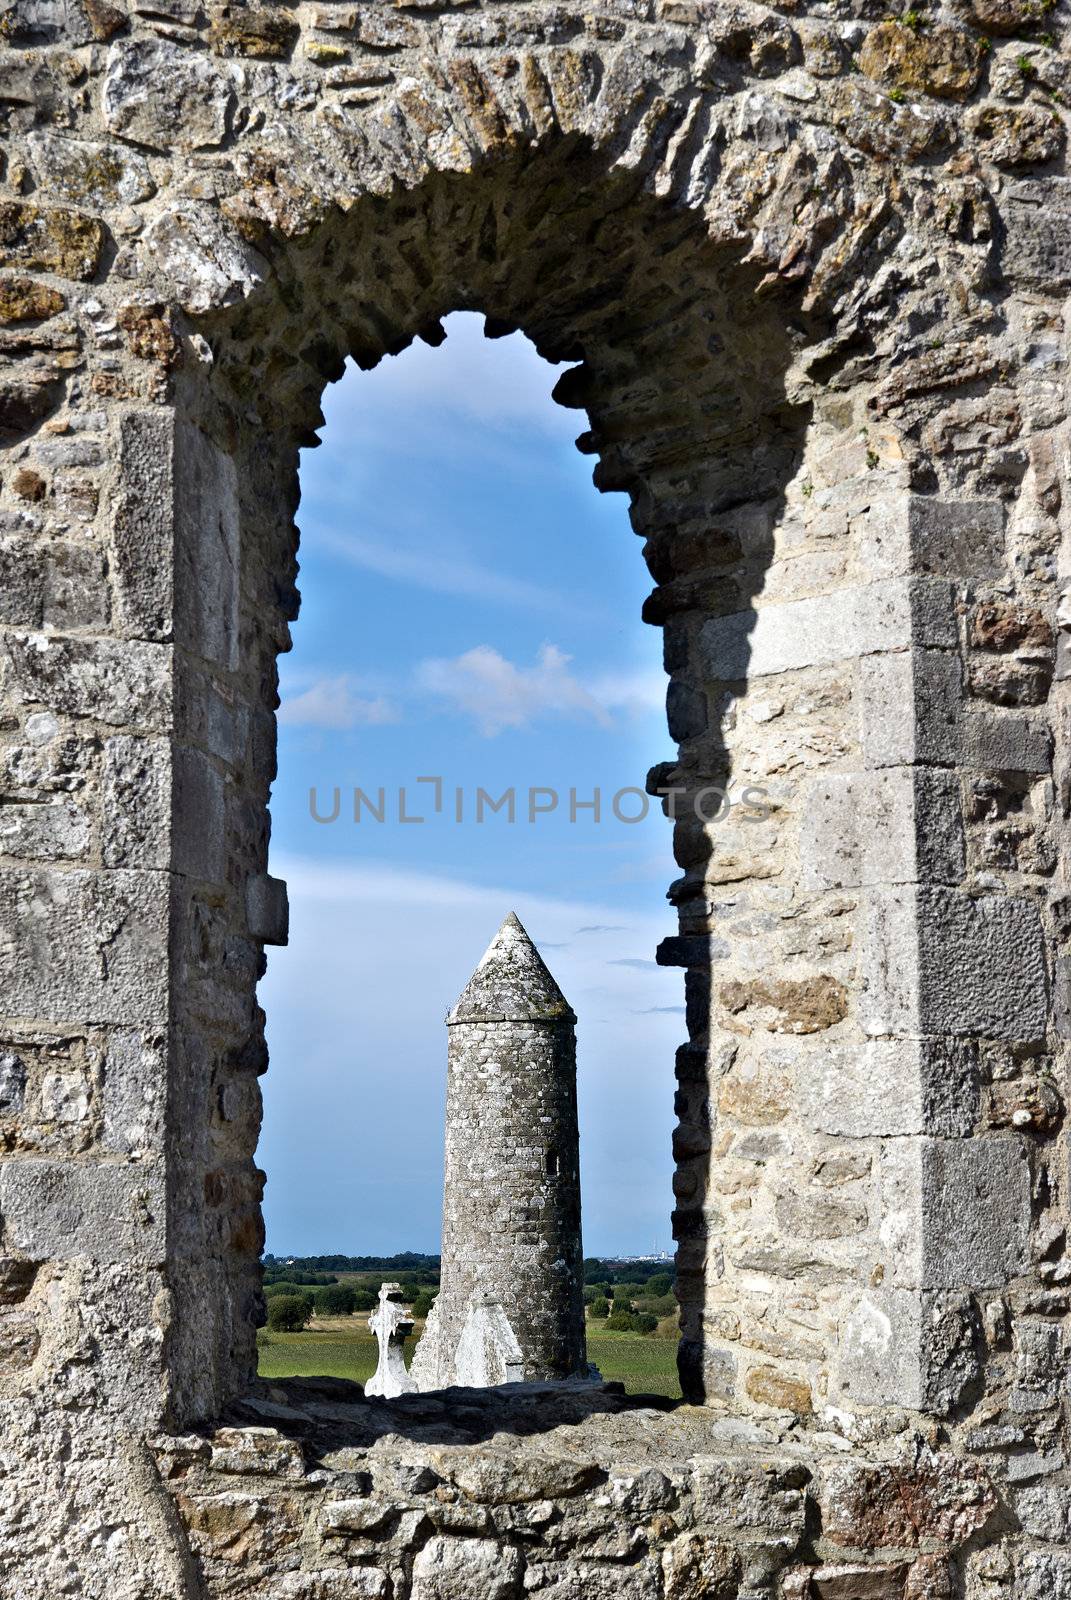 The monastery of Clonmacnoise, Ireland - McCarthy's Tower thru a window of the cathedral